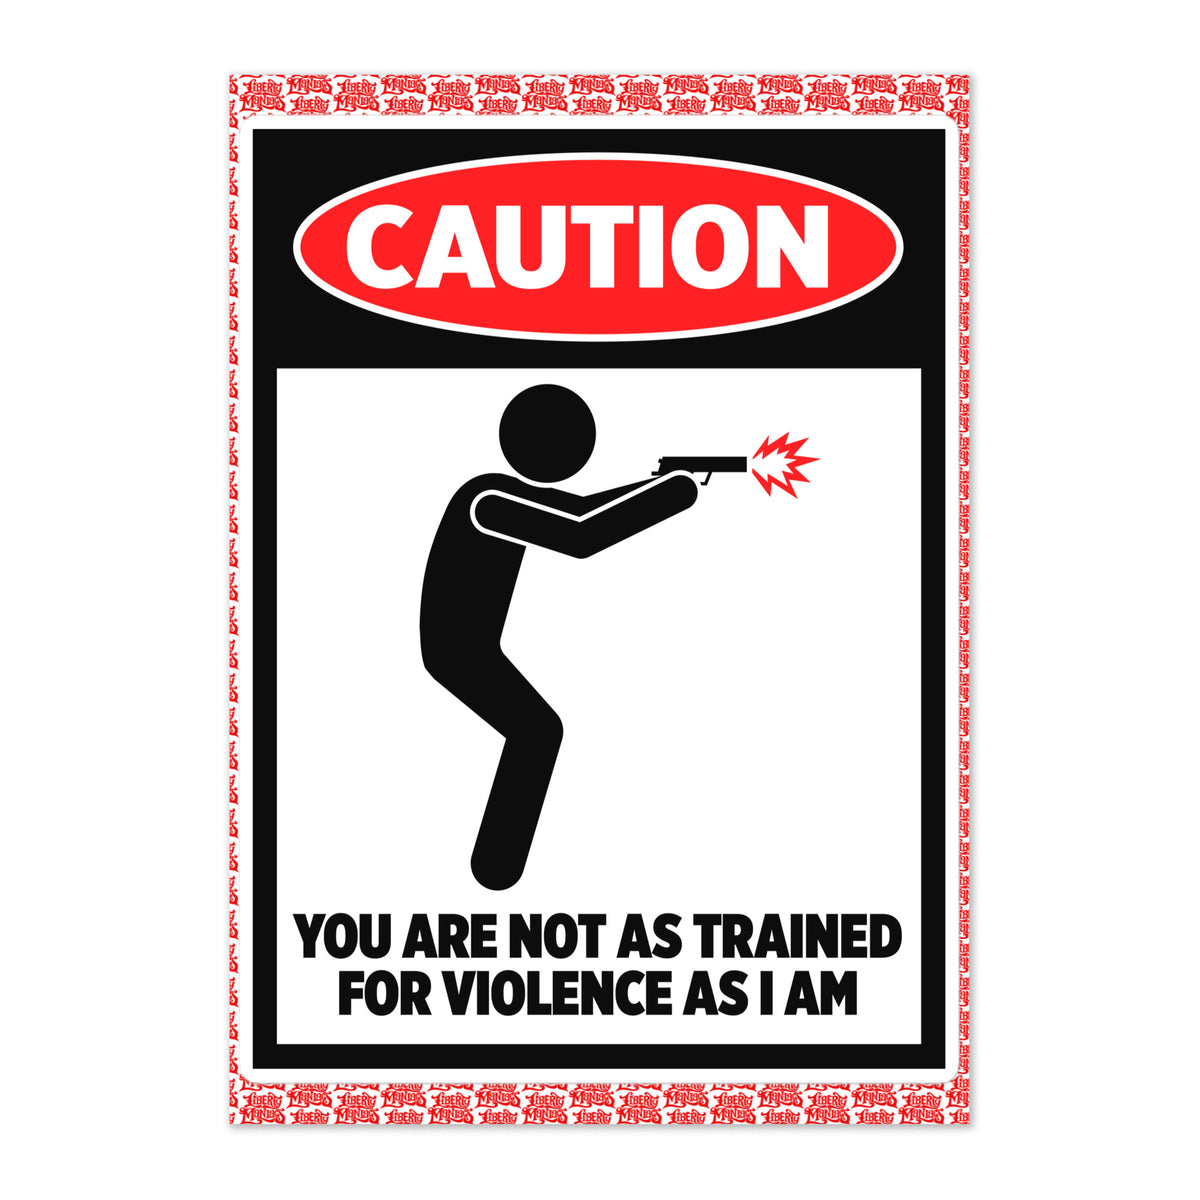 Caution You Are Not As Trained for Violence As I Am Jumbo Sticker